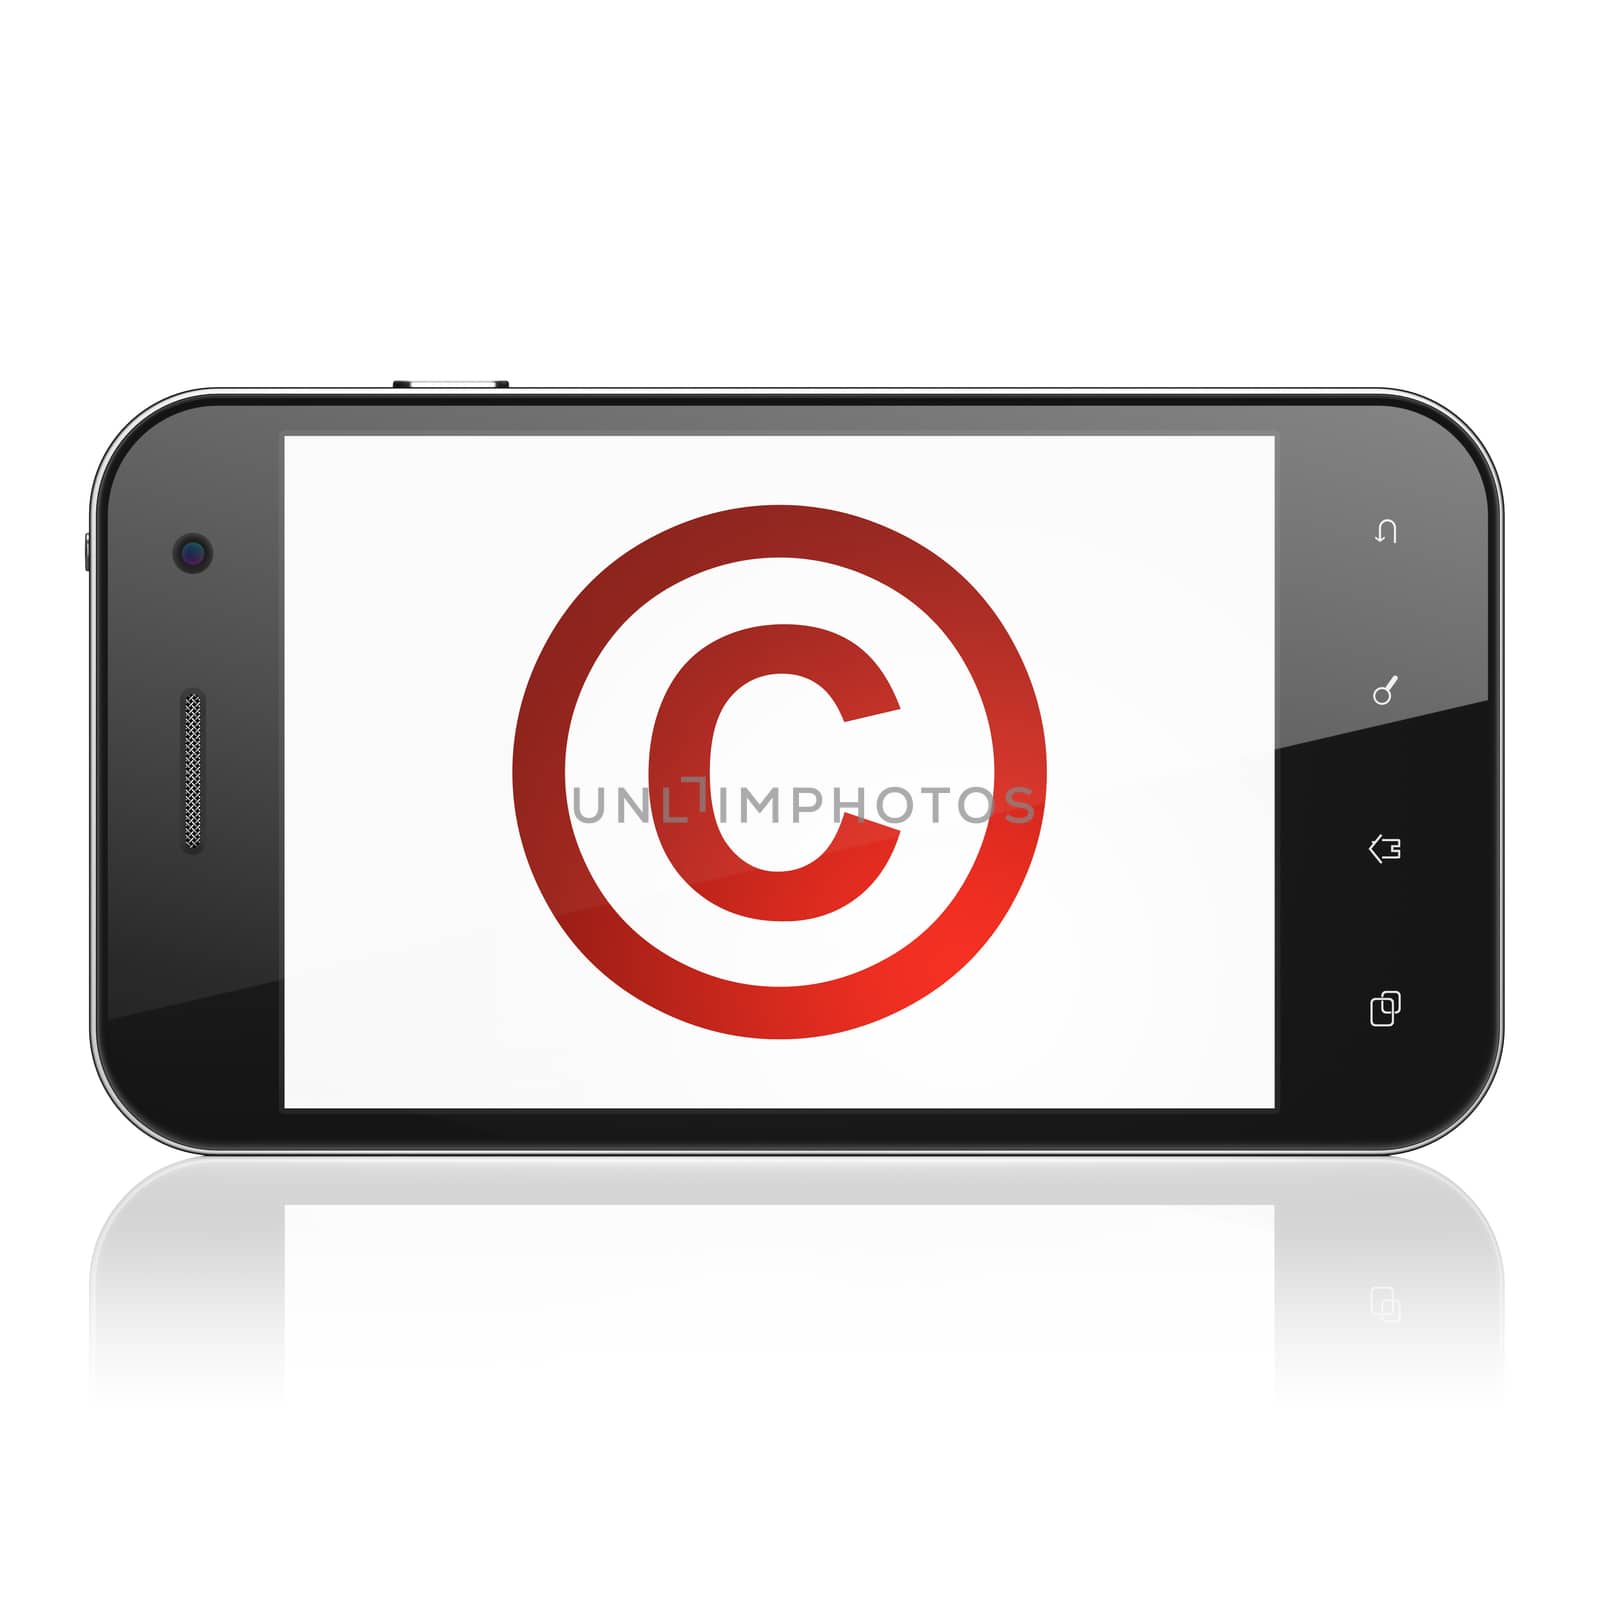 Law concept: Copyright on smartphone by maxkabakov